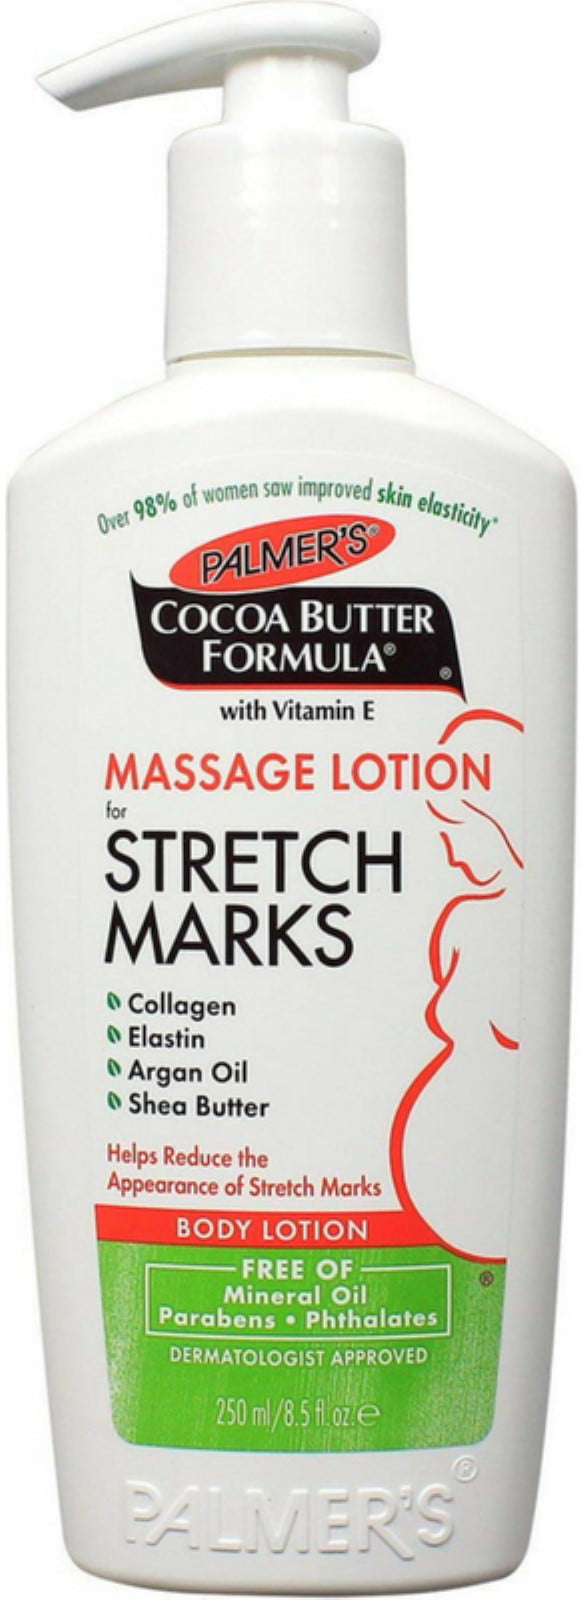 Palmer's Cocoa Butter Formula Massage Lotion for Stretch Marks 8.50 oz (Pack of 3)